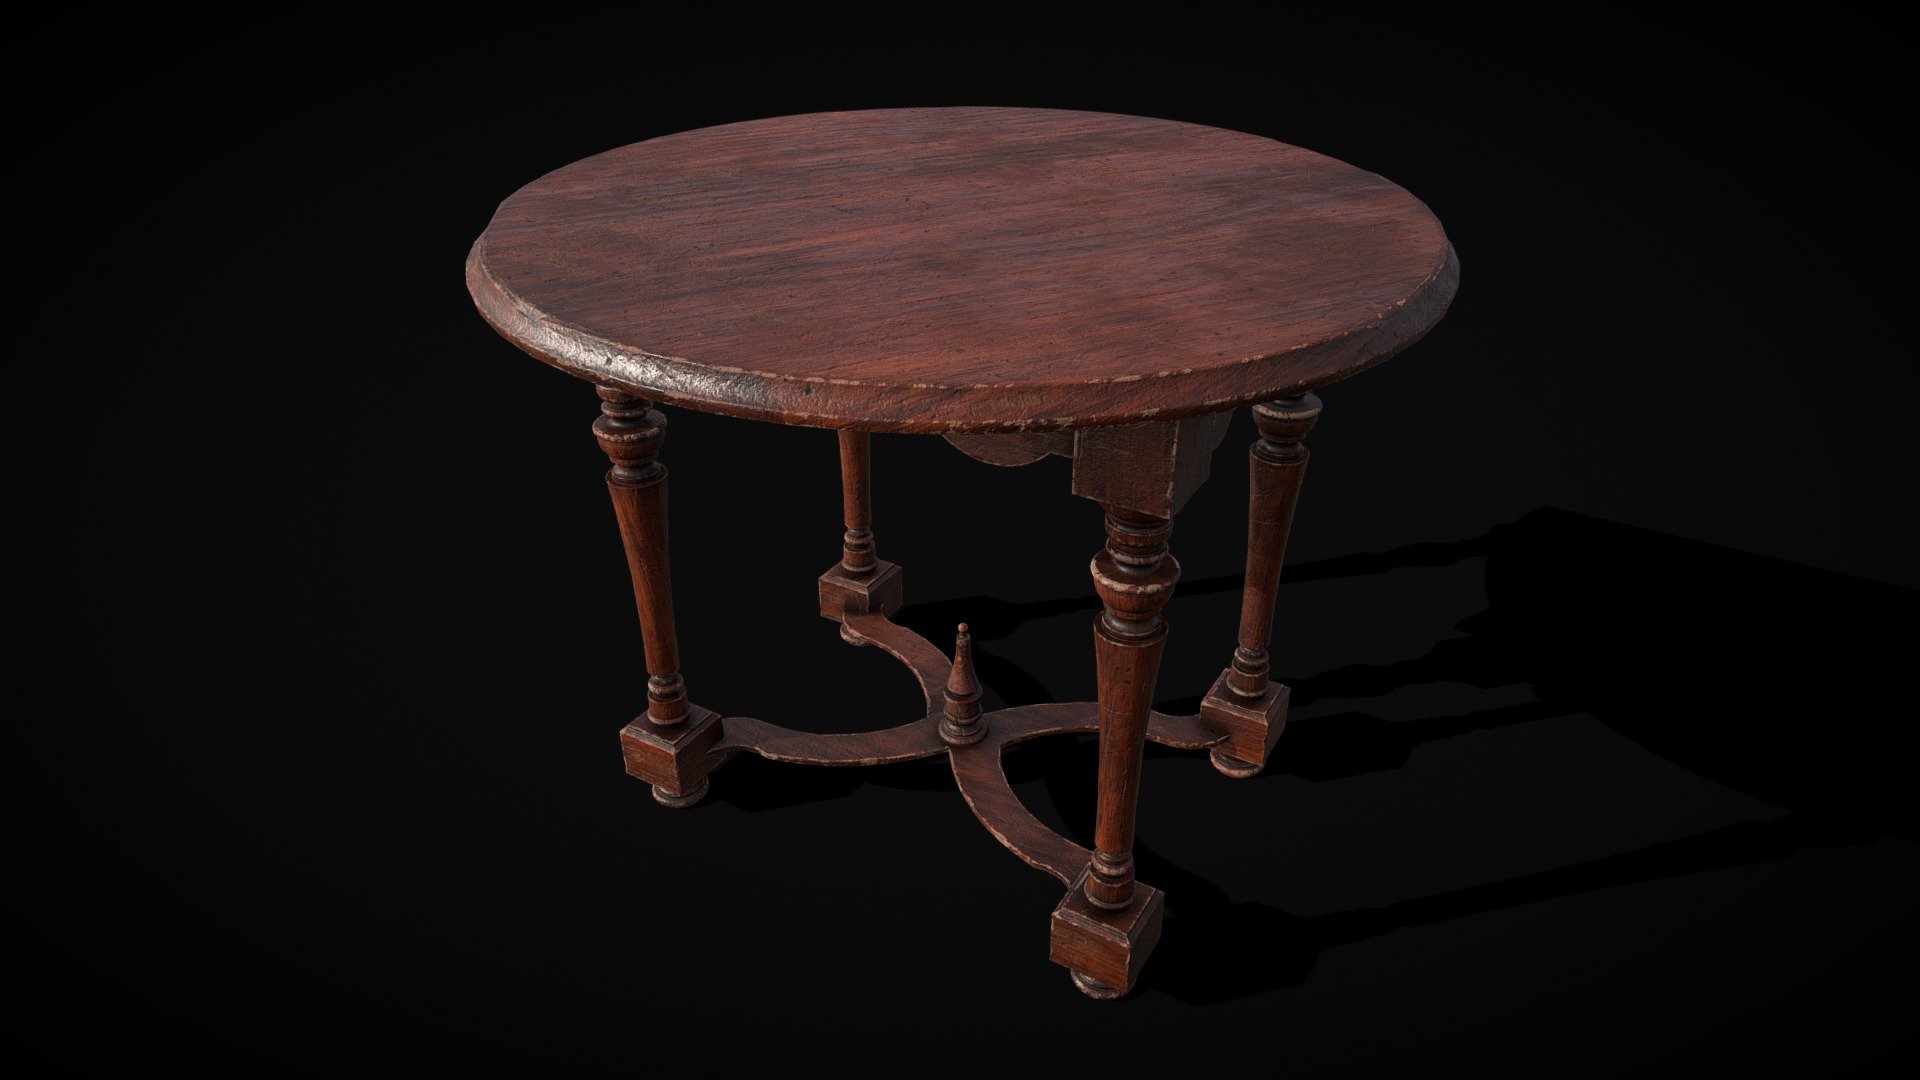 Quality_Medieval_Elegant_Round_Table_OBJ
VR / AR / Low-poly
PBR approved
Geometry Polygon mesh
Polygons 18,346
Vertices 18,212
Textures PNG 4K - Quality Medieval Elegant Round Table - Buy Royalty Free 3D model by GetDeadEntertainment 3d model